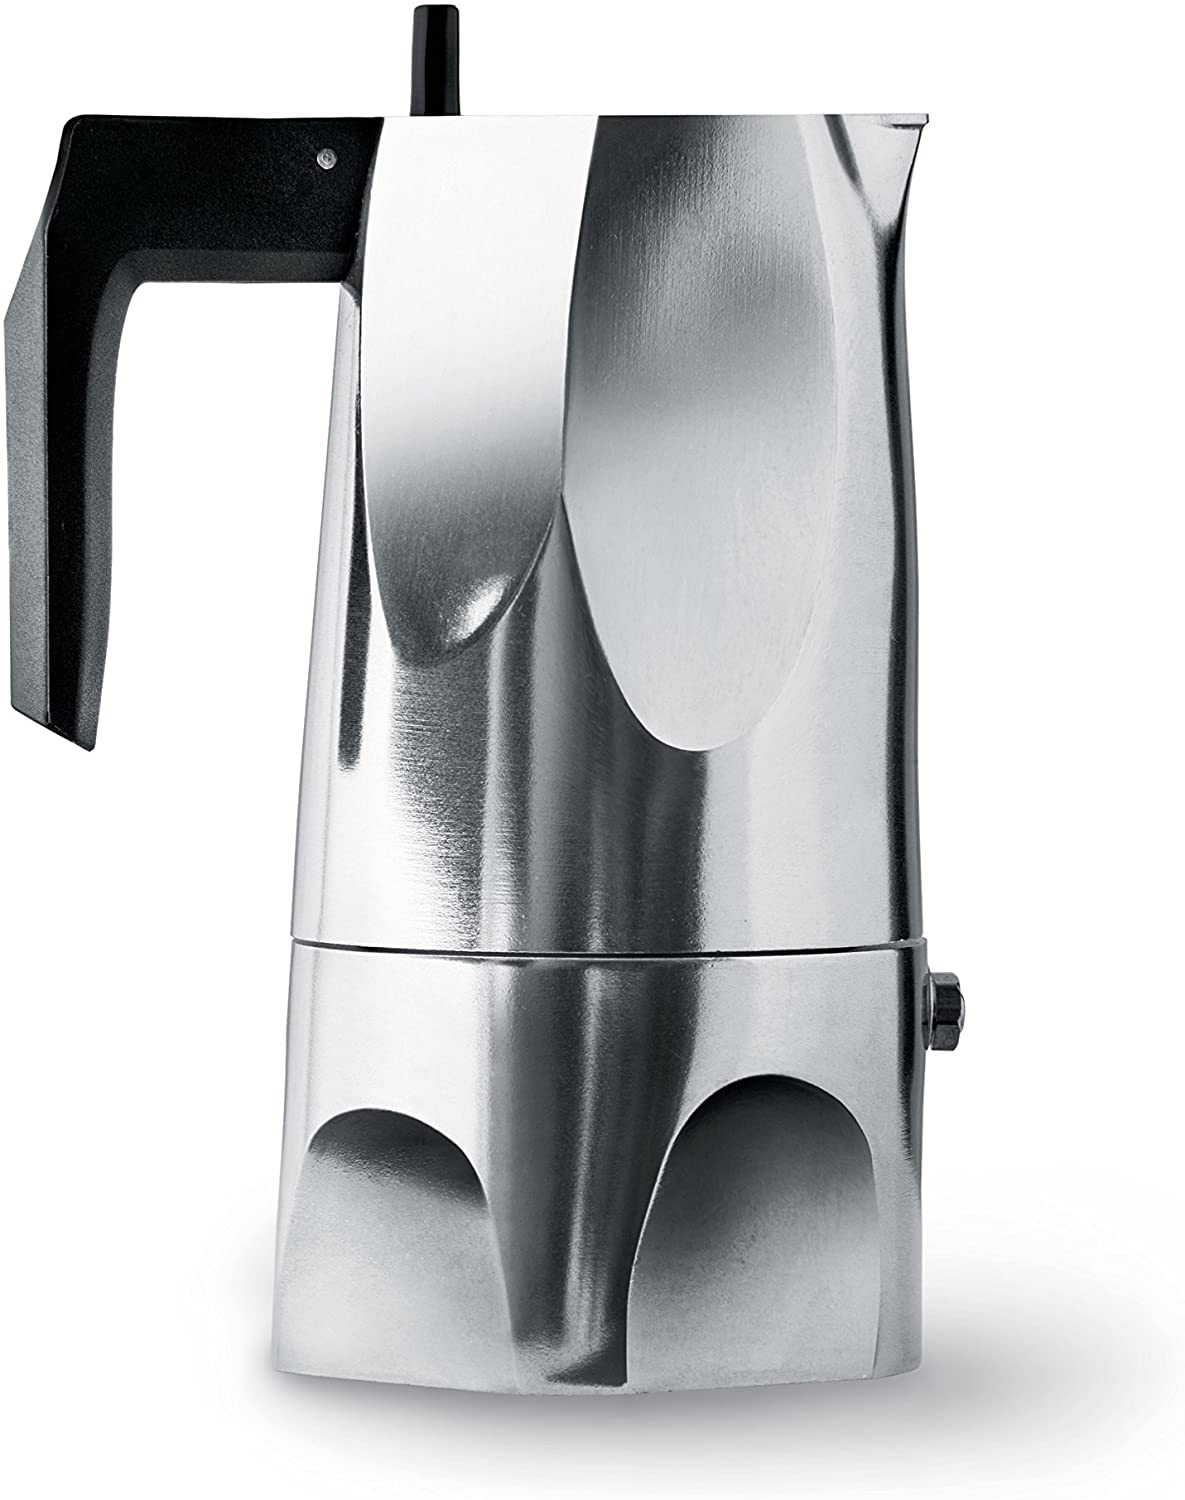 Alessi 3-Cup Ossidiana Espresso Coffee Maker in Aluminium Casting Handle with Knob in Thermo Plastic ResinBlack